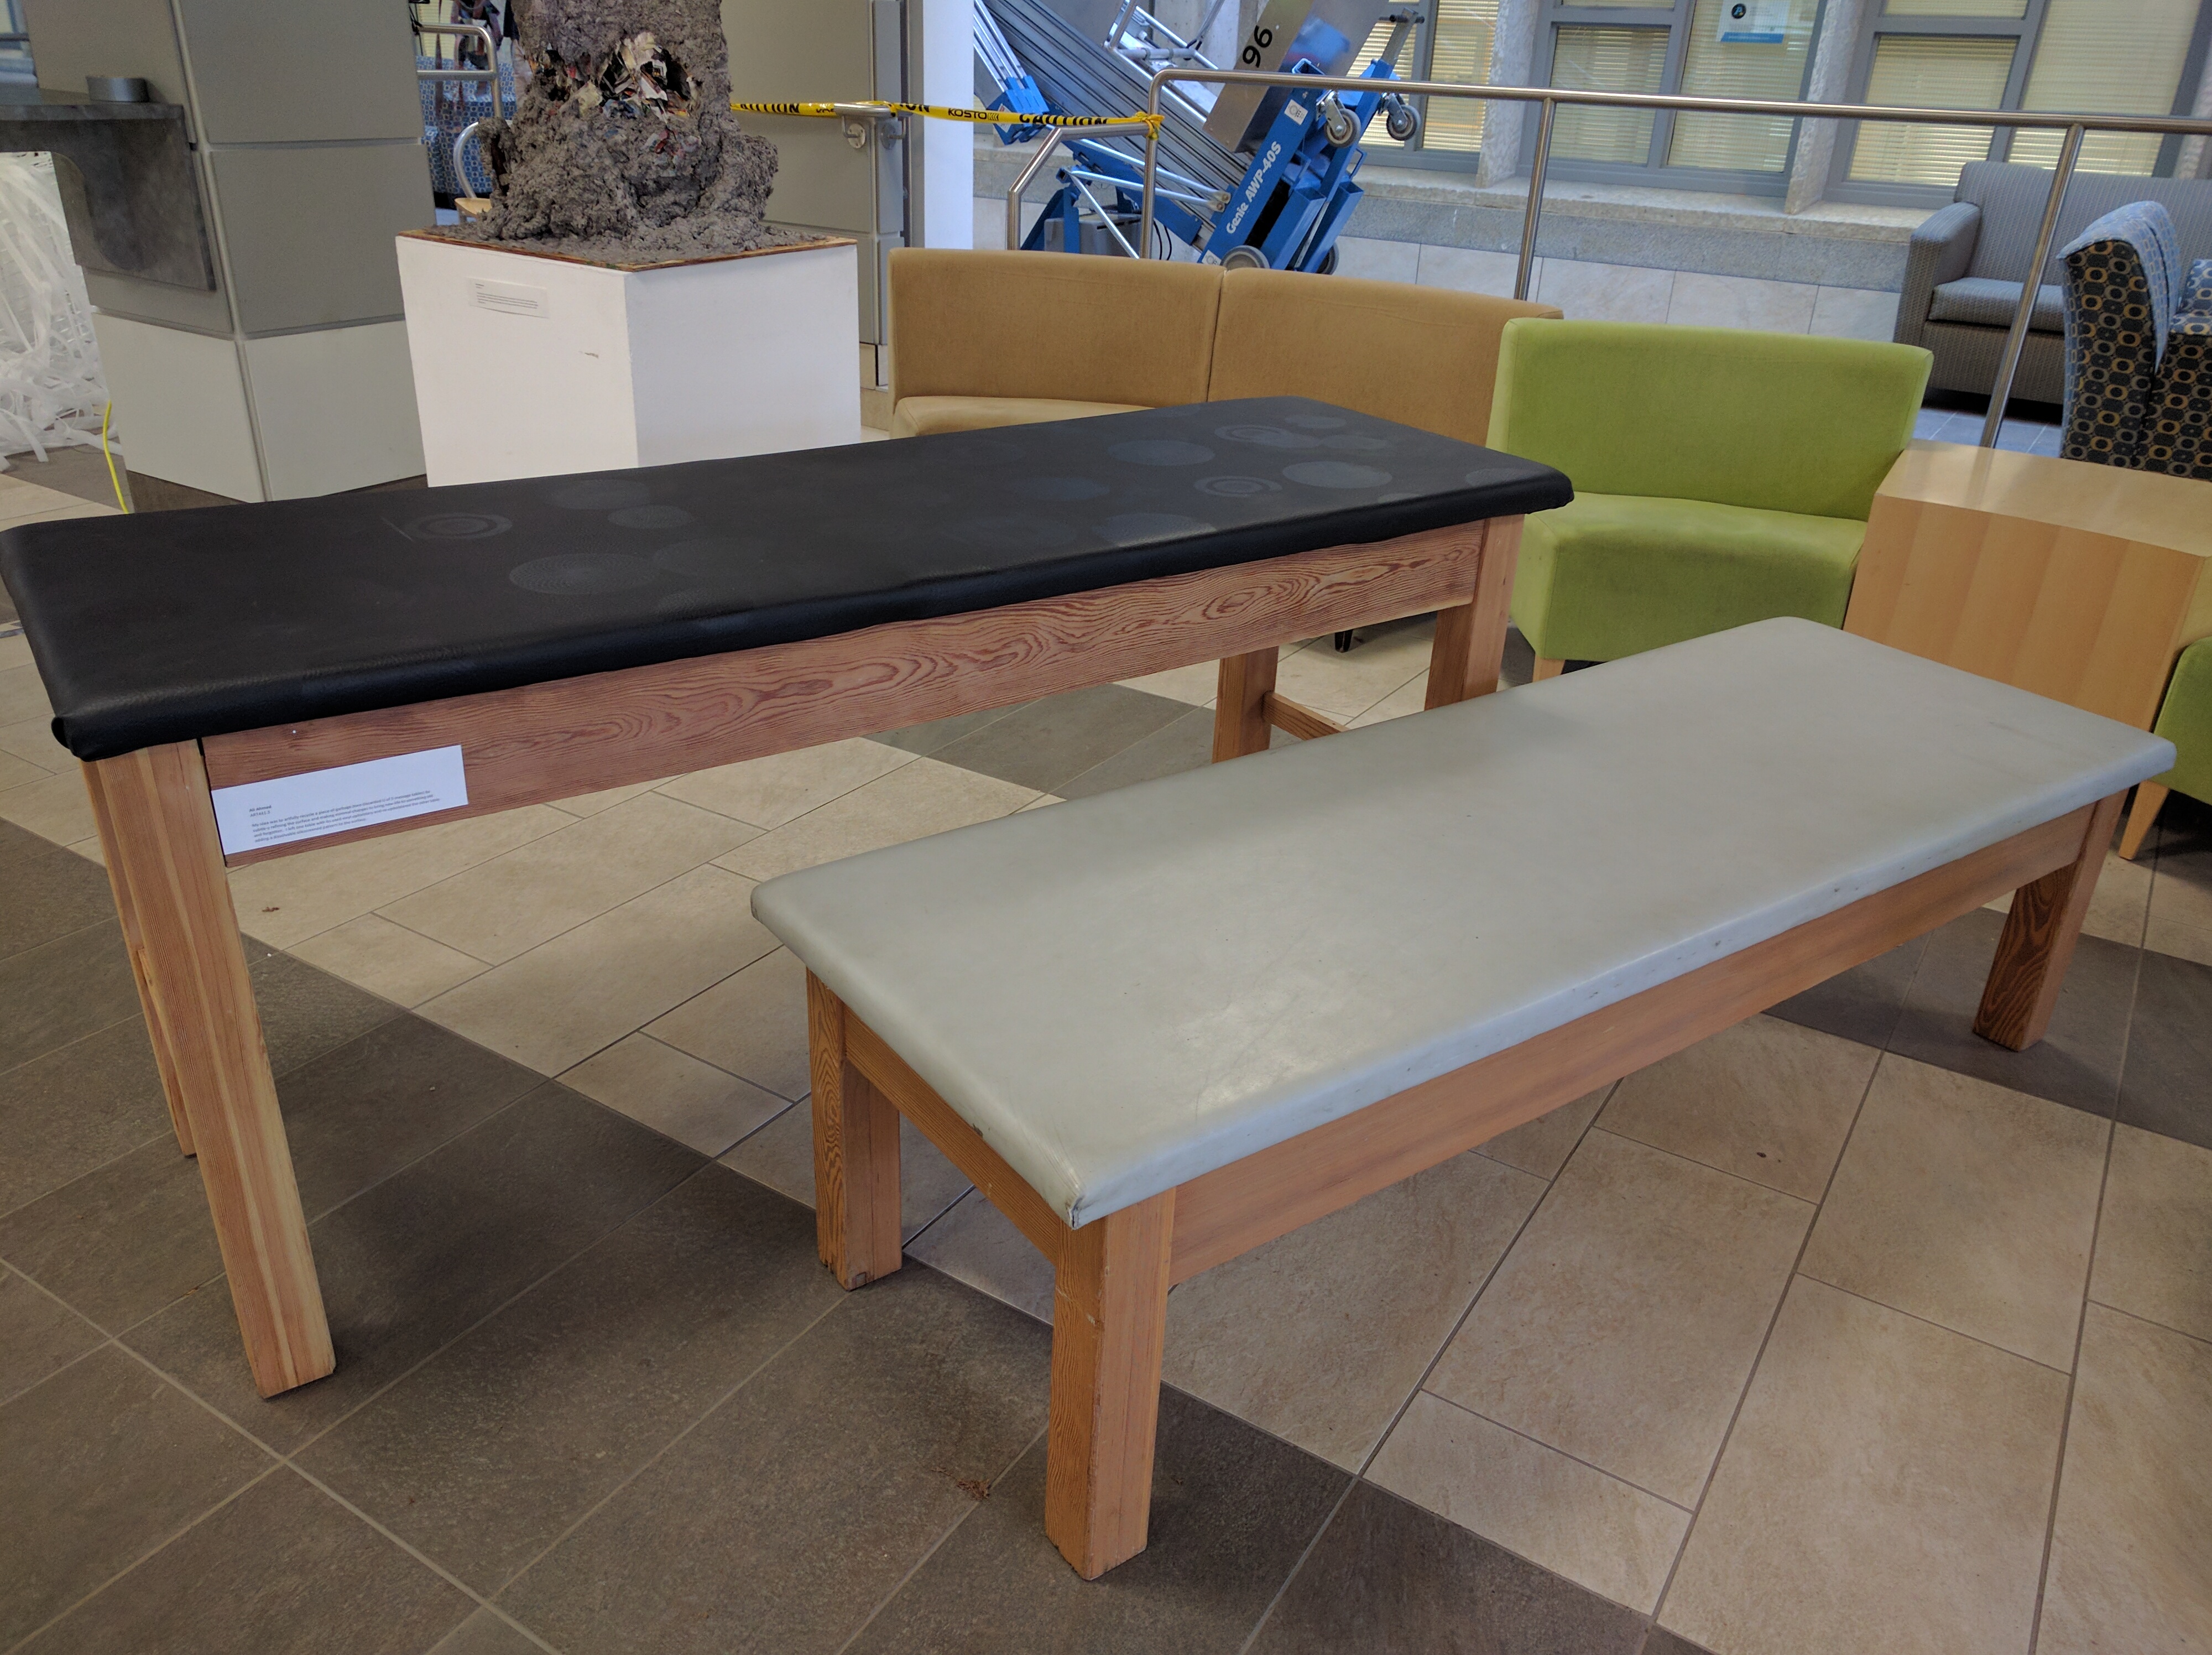 A set of massage tables -- one refurbished -- made by art student Ali Ahmed